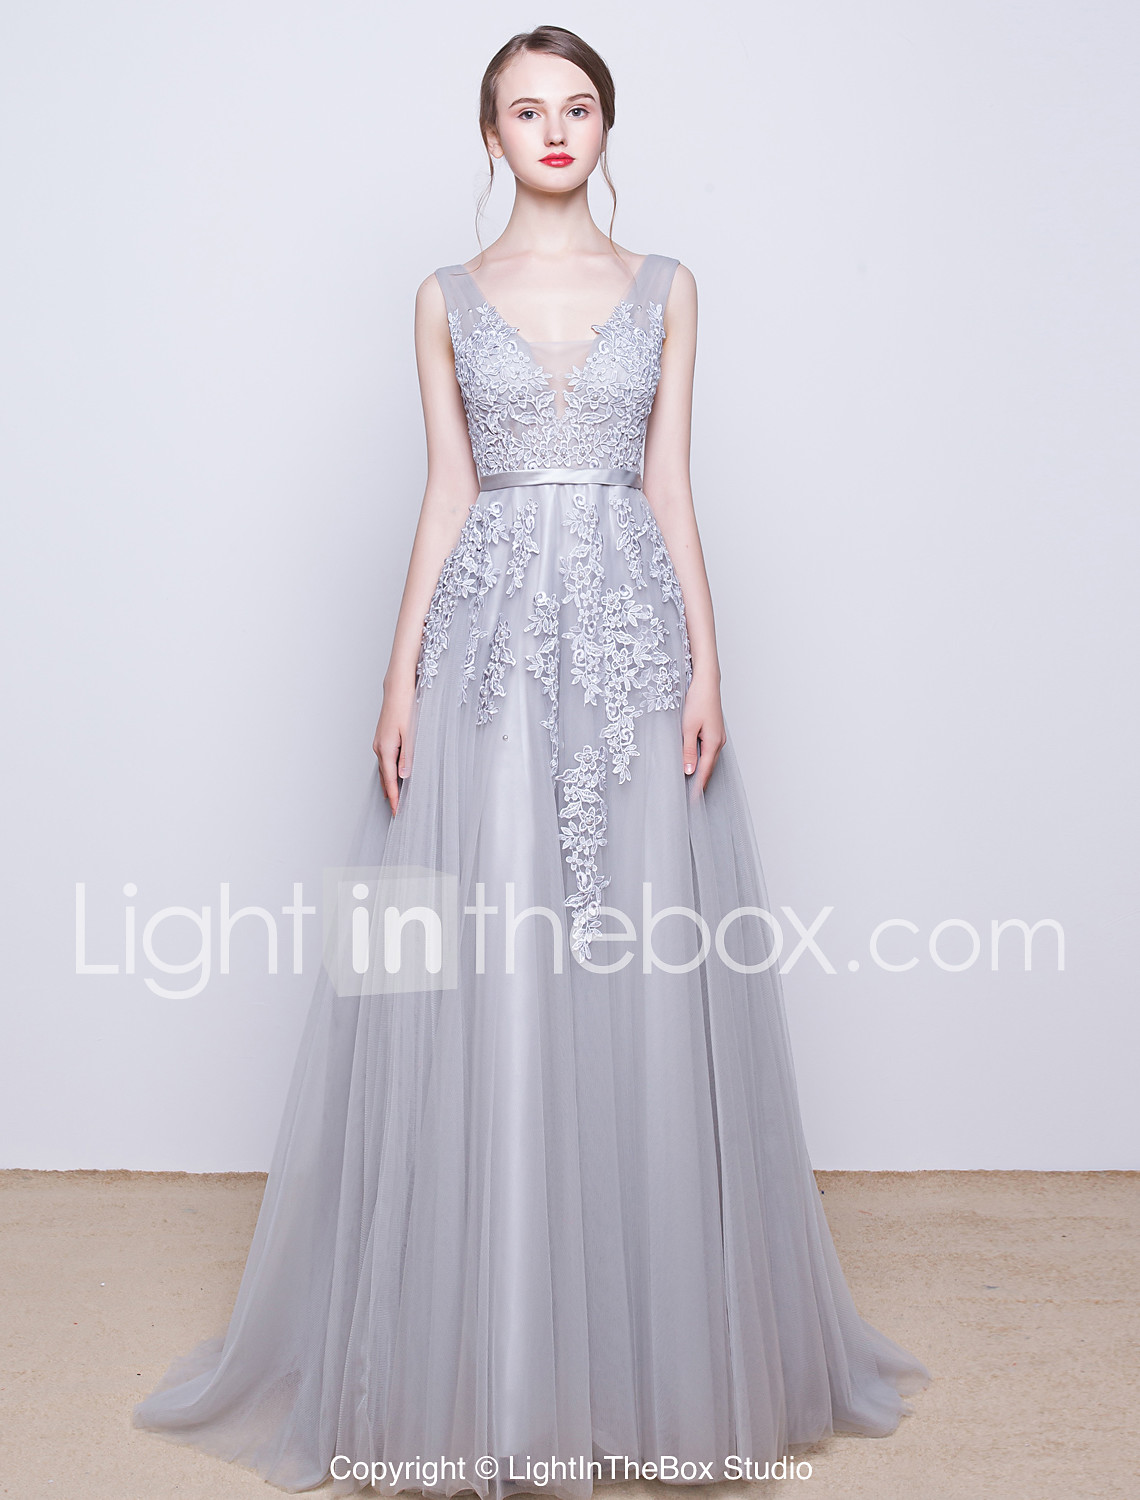 Shop for cheap Evening Dresses? We have great 2018 Evening Dresses on sale. Buy cheap Evening Dresses online at lightinthebox.com today!